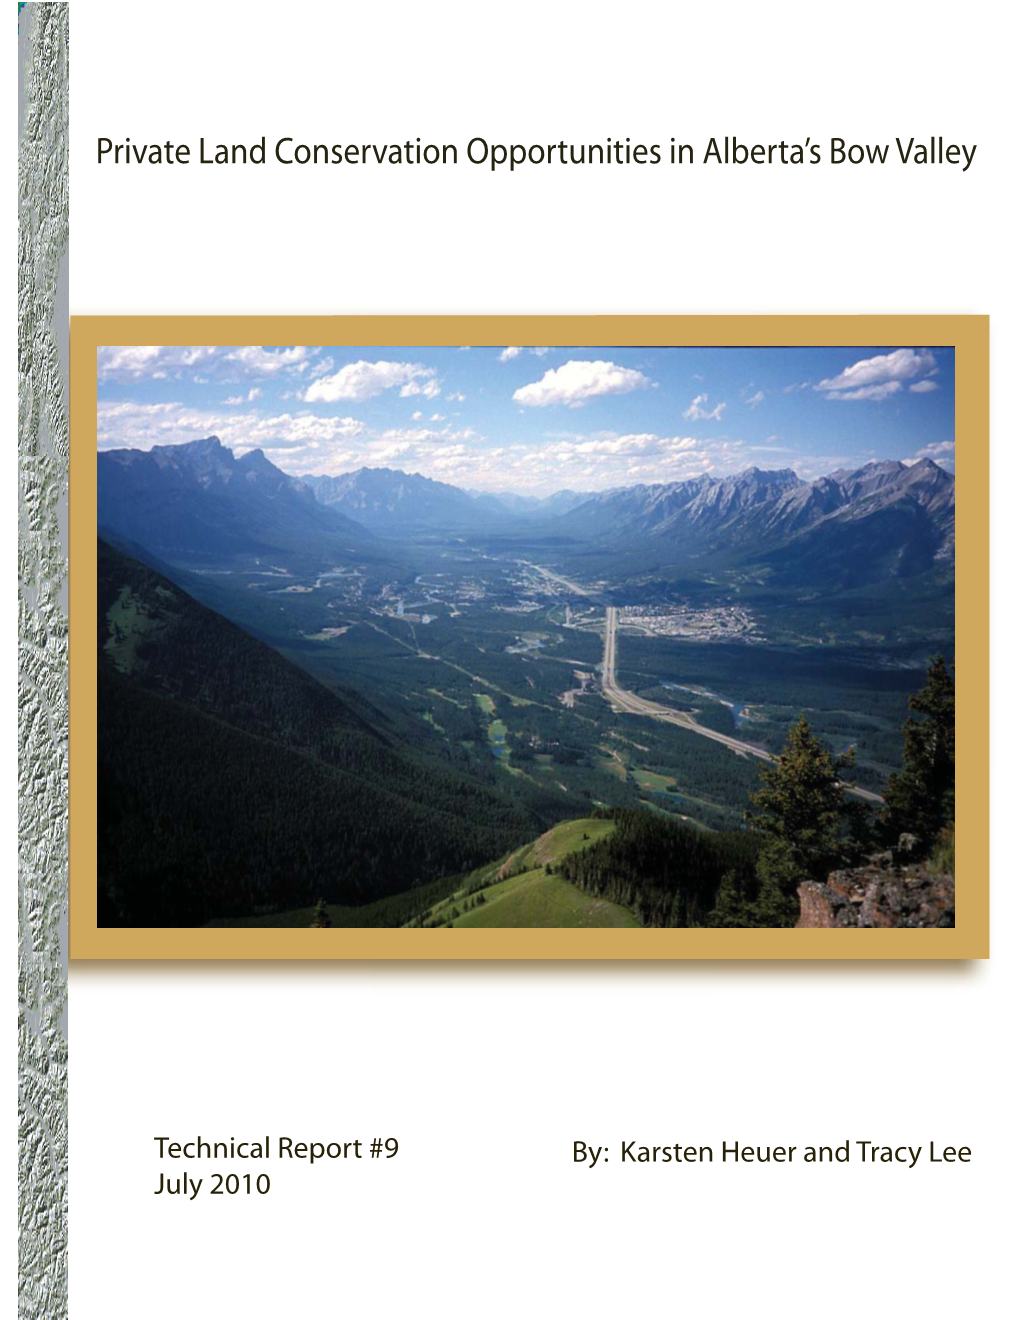 Private Land Conservation Opportunities in Alberta's Bow Valley